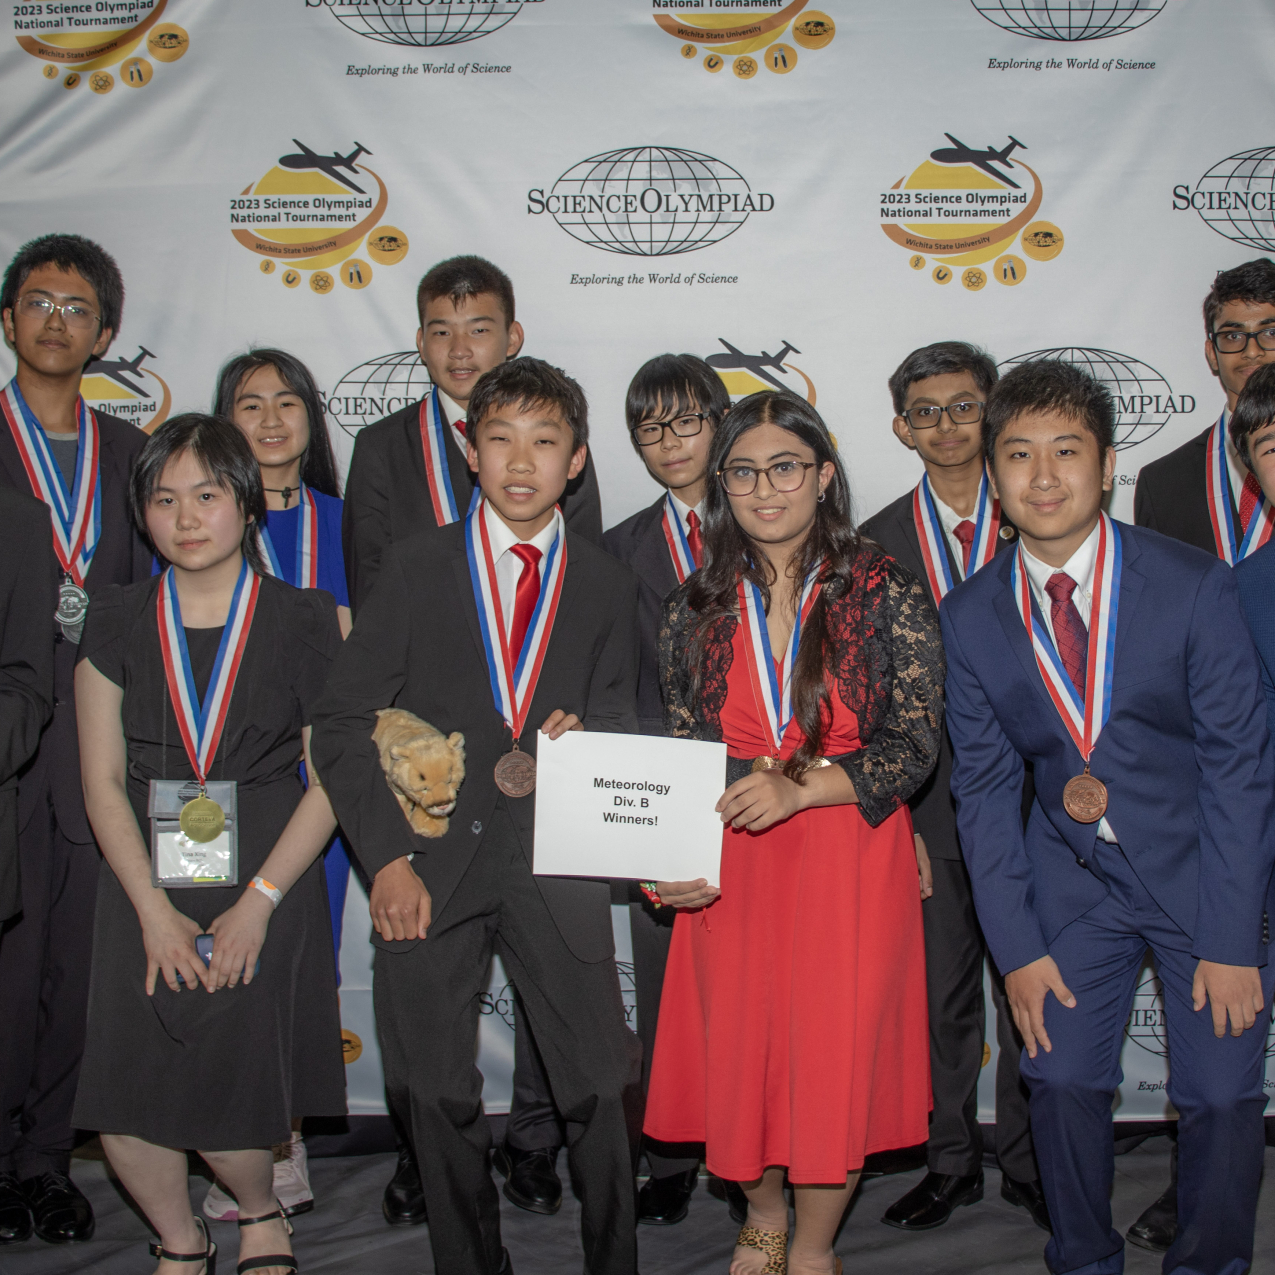 Twelve students dressed in formal attire pose for a group photo in front of a backdrop that has the Science Olympiad National Tournament logo on it. The students in the front row are holding a sign that says Meteorology Div B Winners!